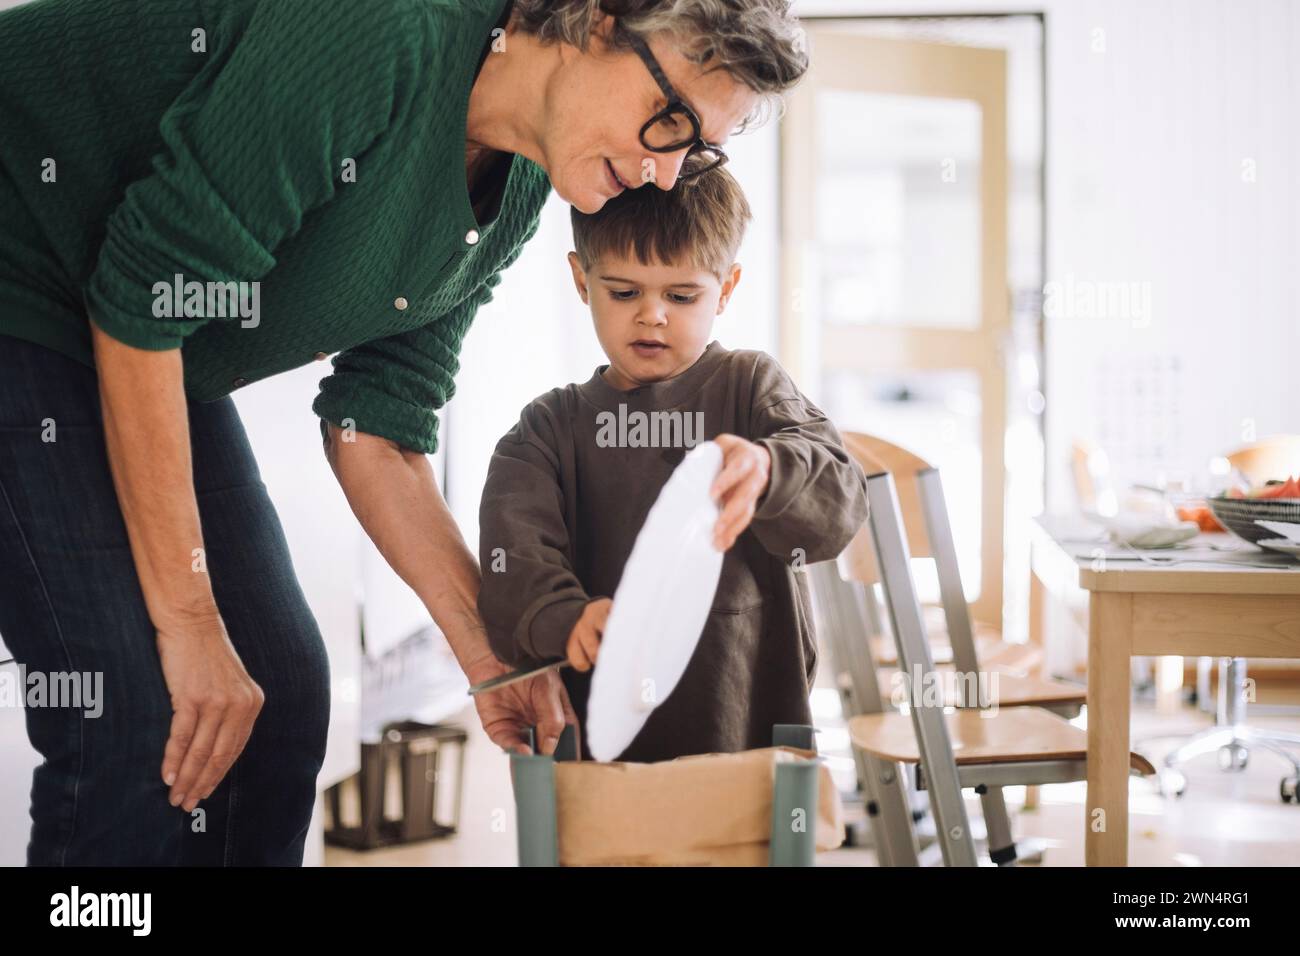 Boy throwing leftover food in garbage can with teacher at kindergarten Stock Photo